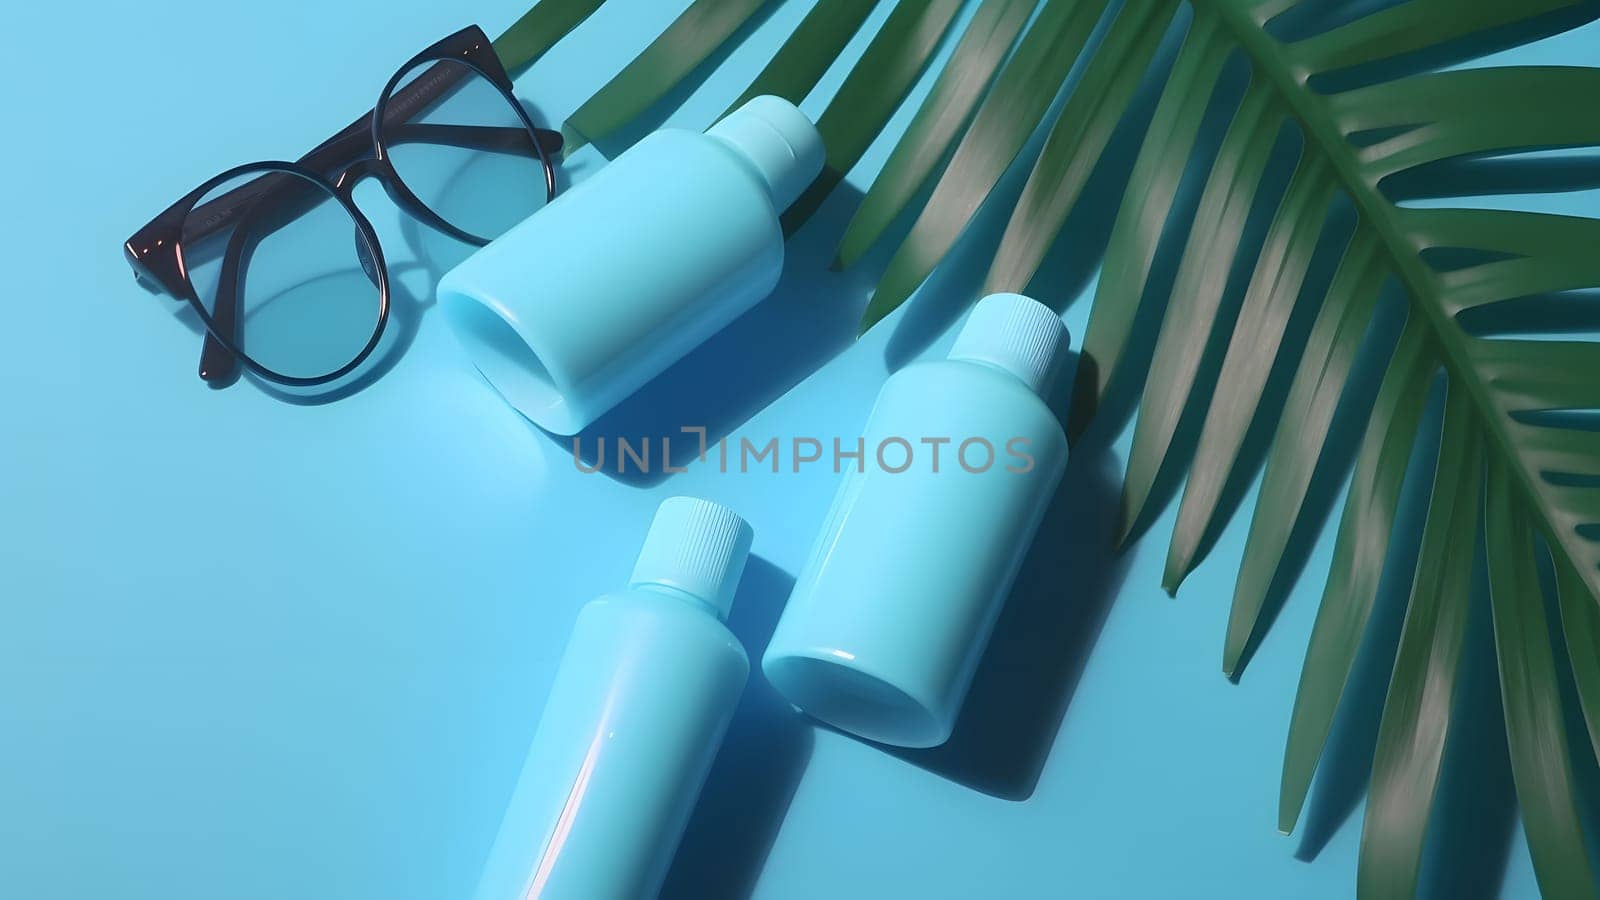 Sunblock lotion bottles and sunglasses with palm leaf on light-blue background, neural network generated image by z1b